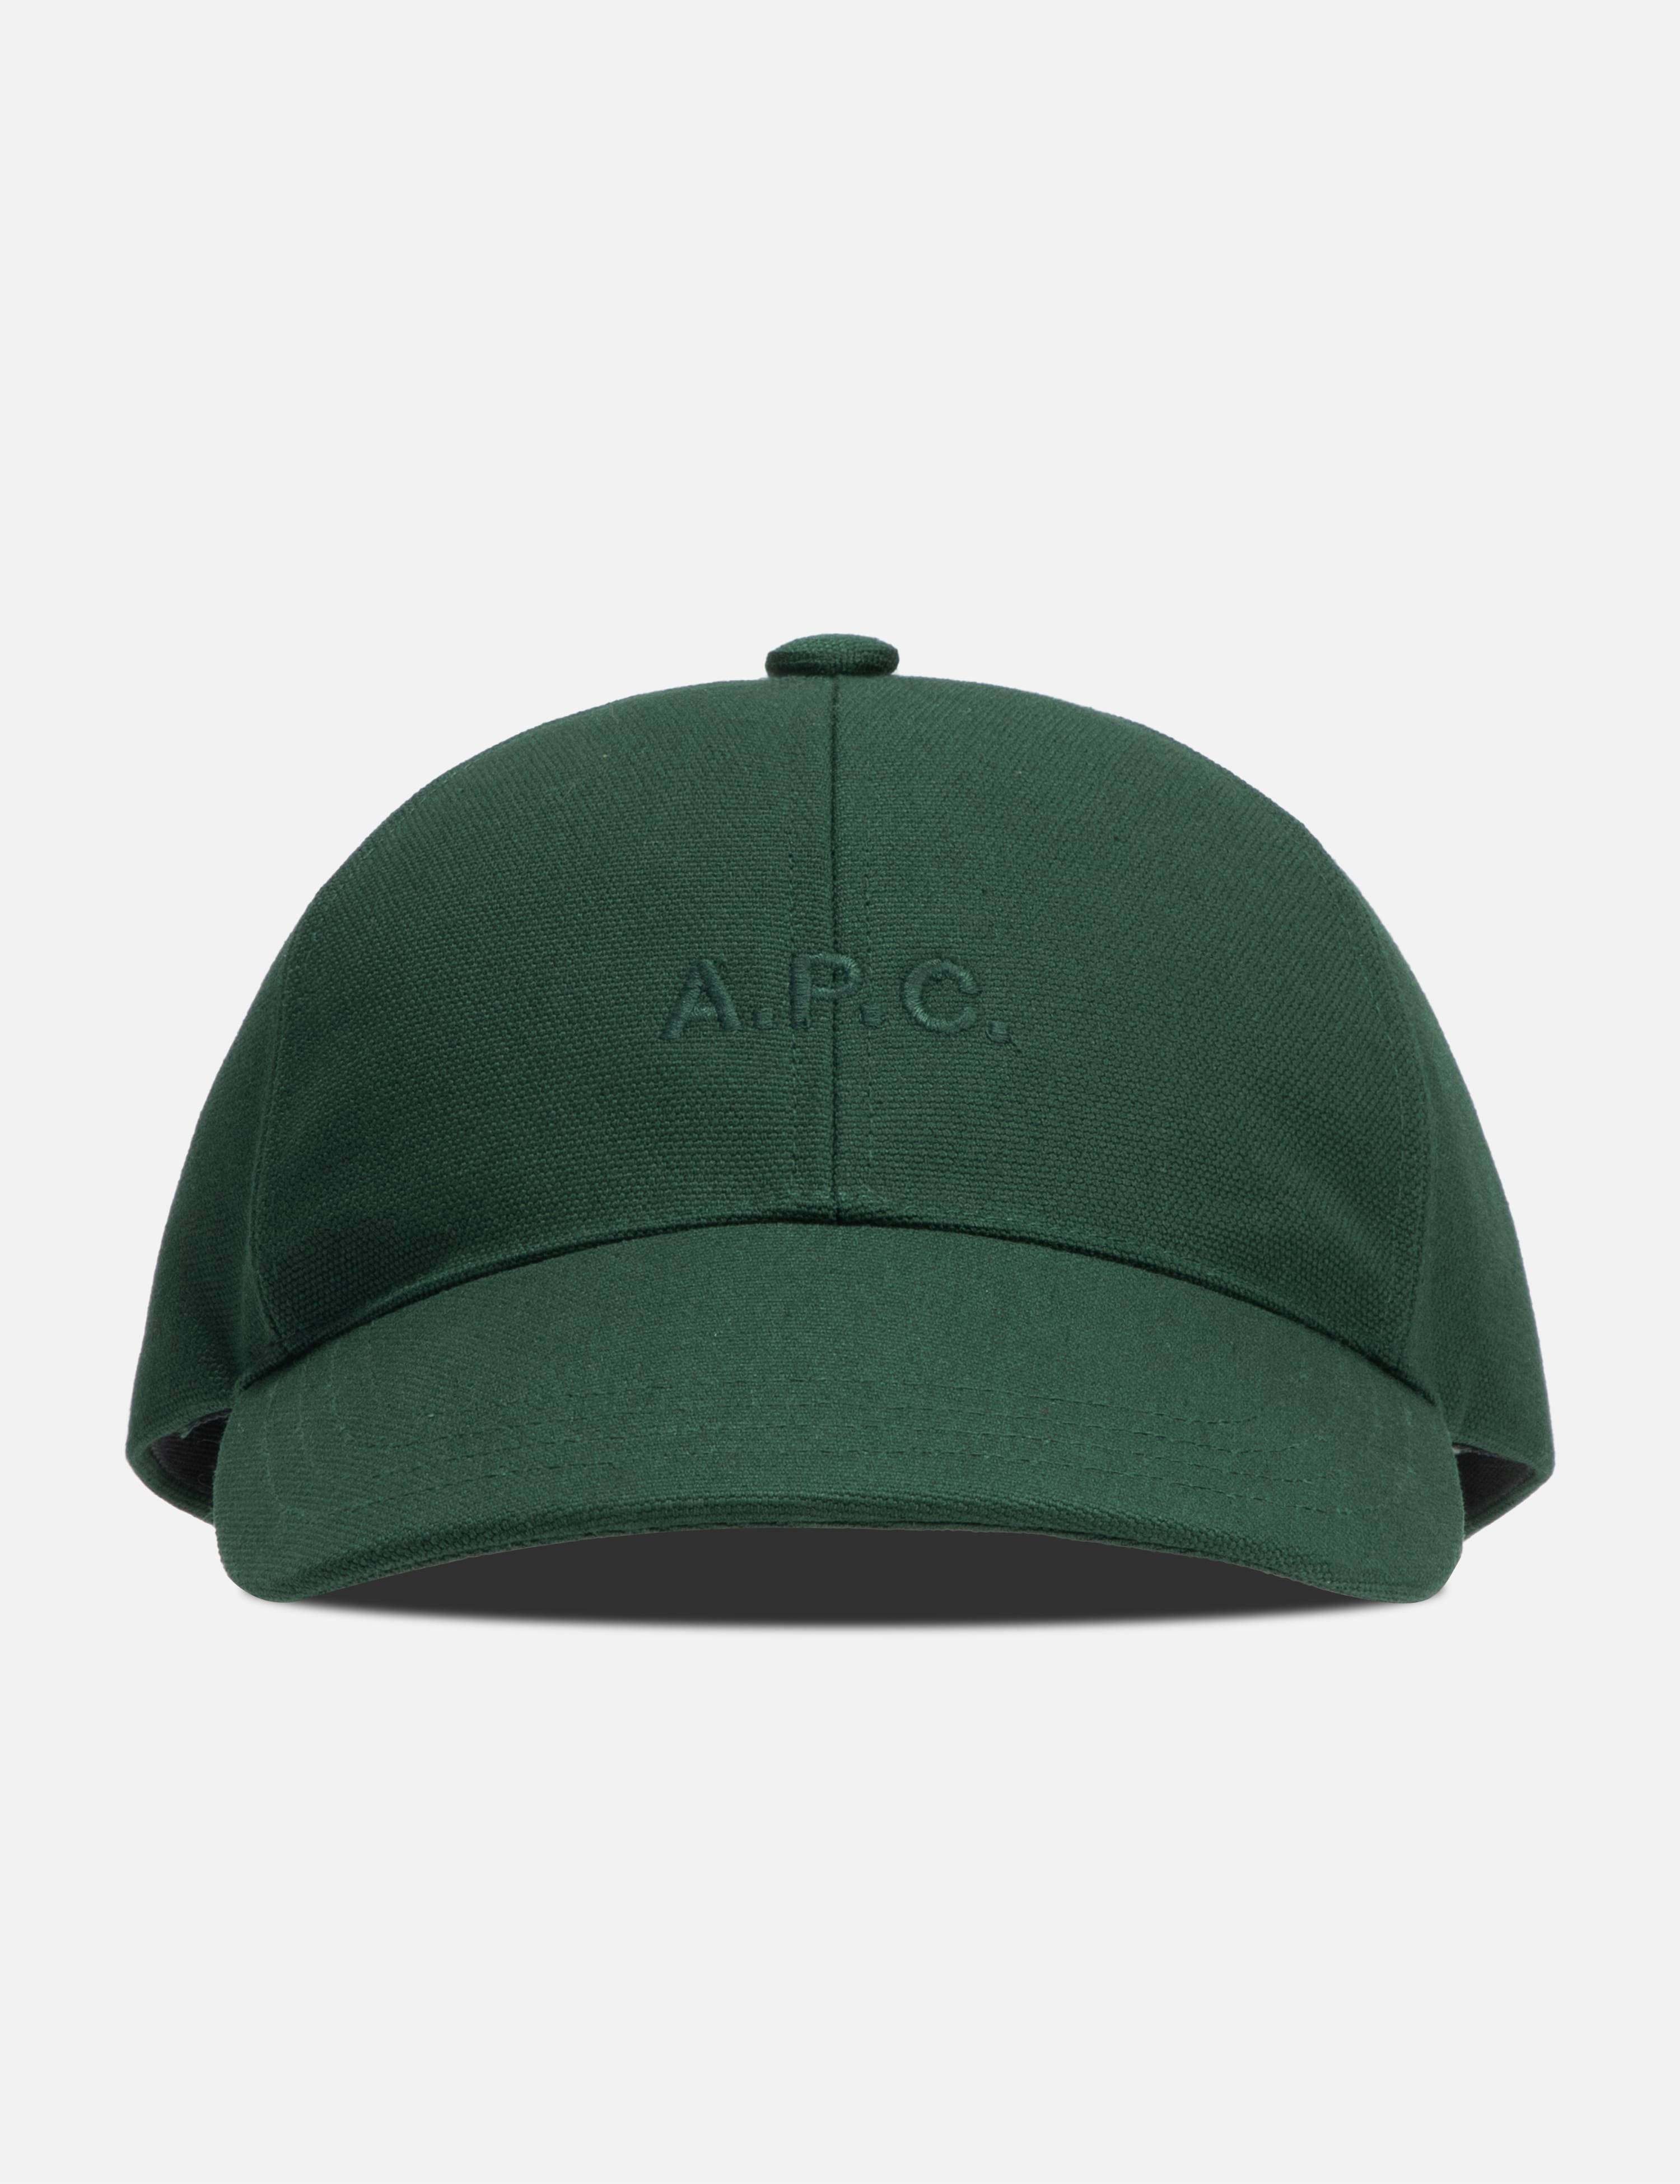 A.P.C. - Charlie Baseball Cap | HBX - Globally Curated Fashion and